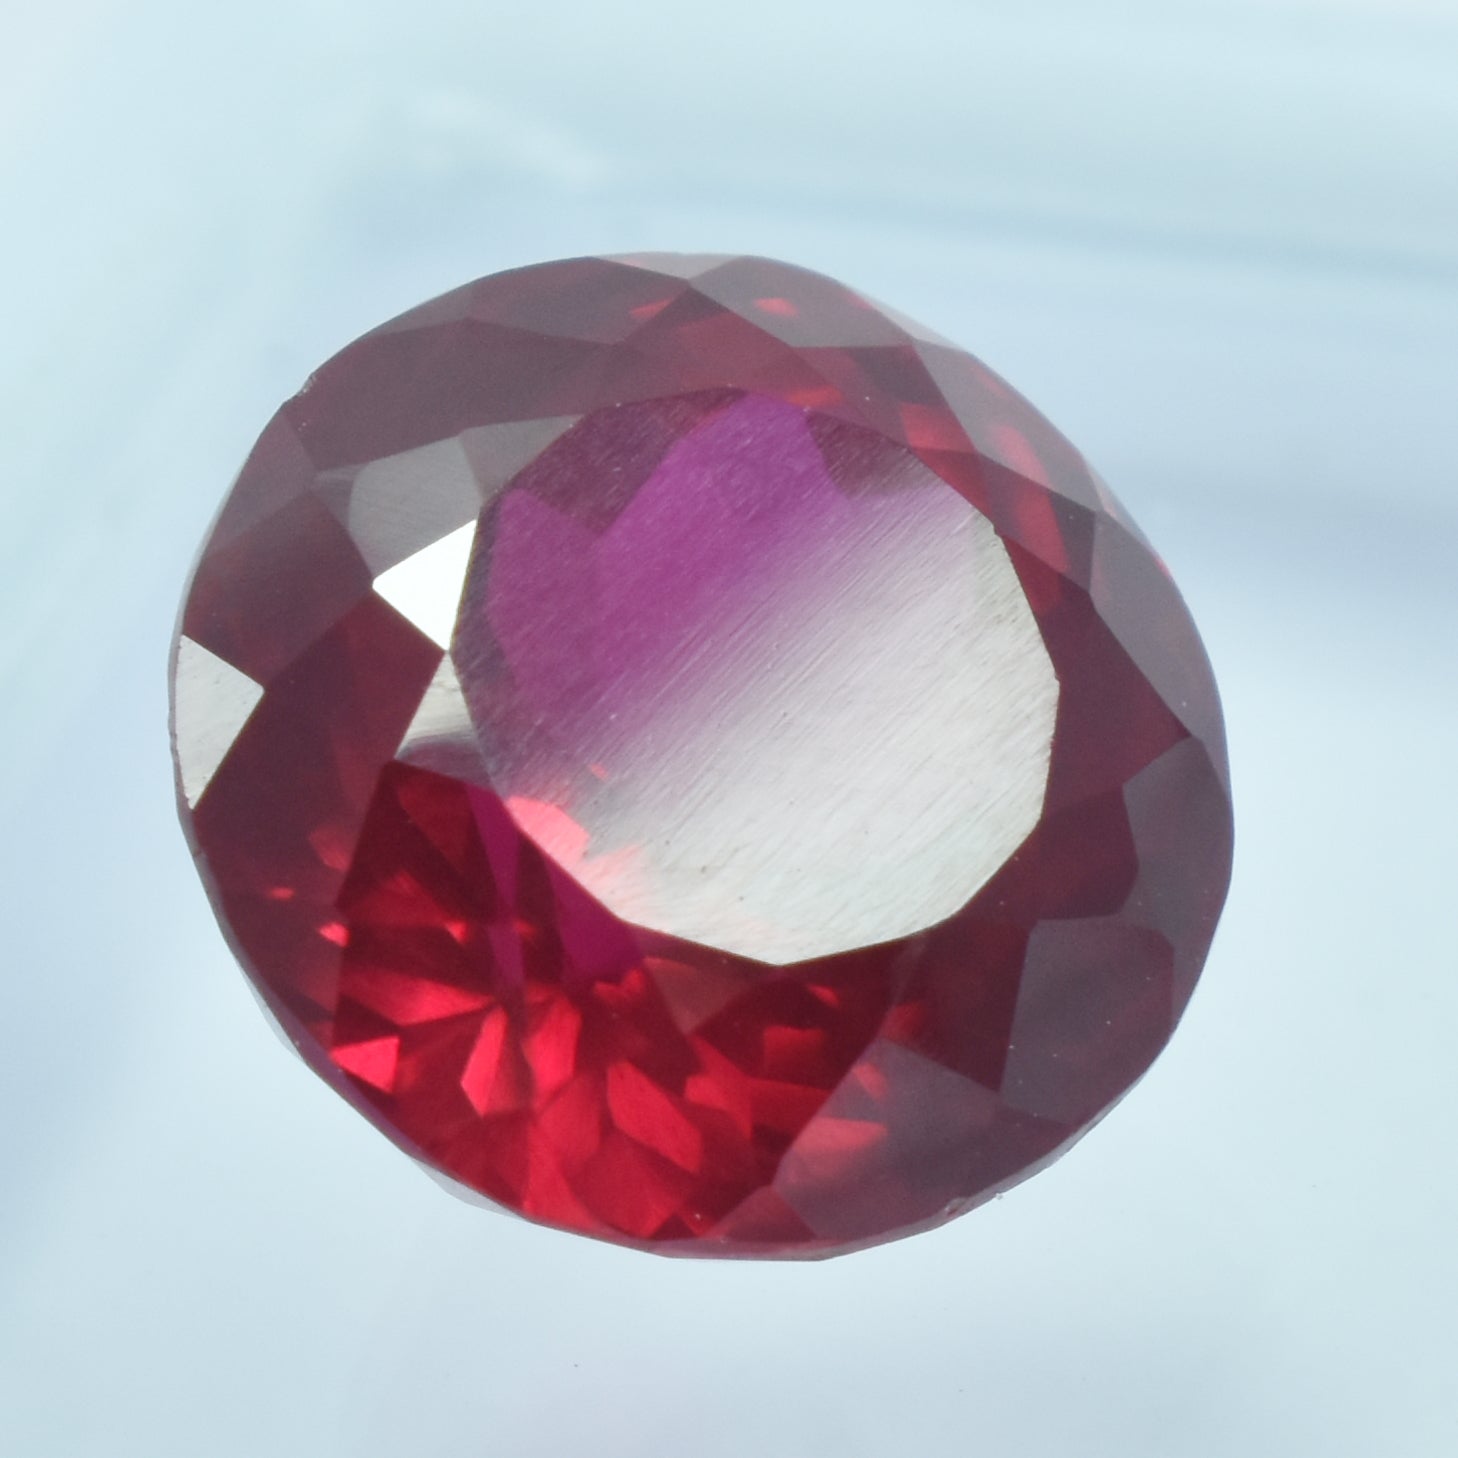 Most Beautiful Red Ruby 10.65 Carat Round Cut Rubies Red Natural Ruby Certified Loose Gemstone